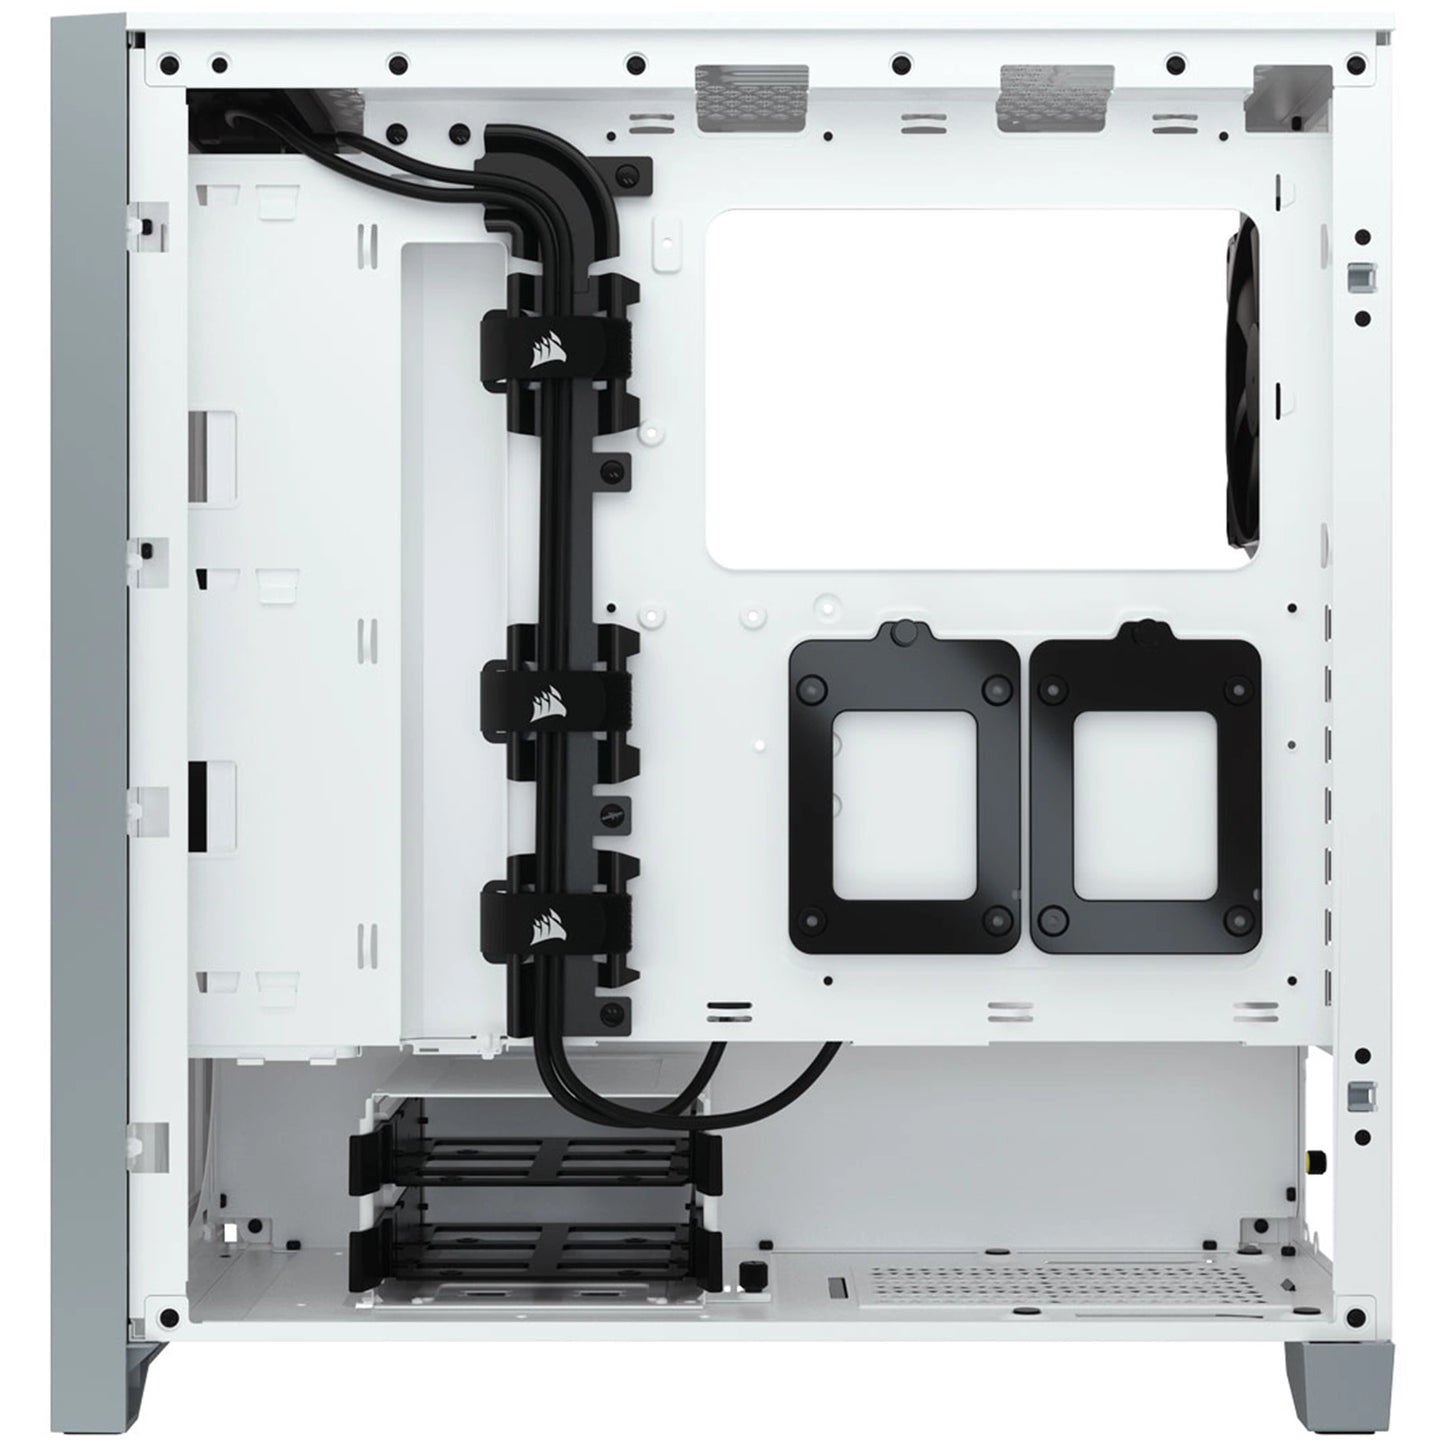 Corsair 4000D Airflow White ATX MidTower Tempered Glass Gaming Case